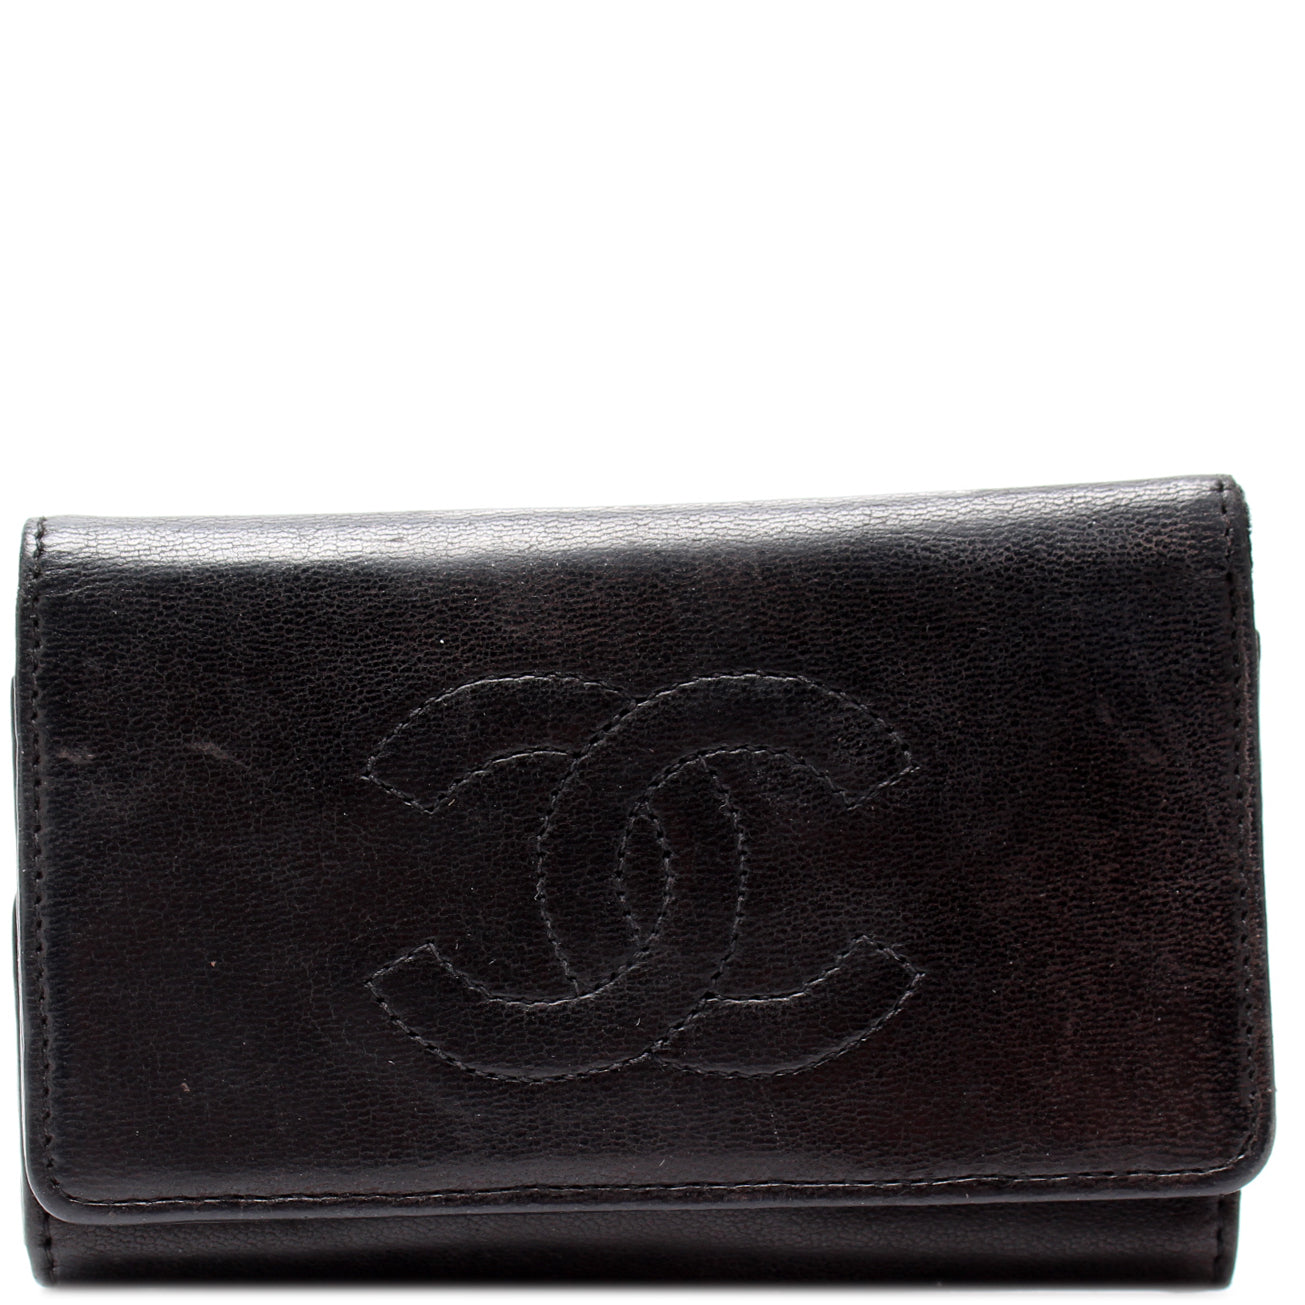 CHANEL - Black - Holder - Rings - Key - CHANEL Face Makeup - Key - Case - 6  - Skin - ep_vintage luxury Store - Caviar - A13502 – dct